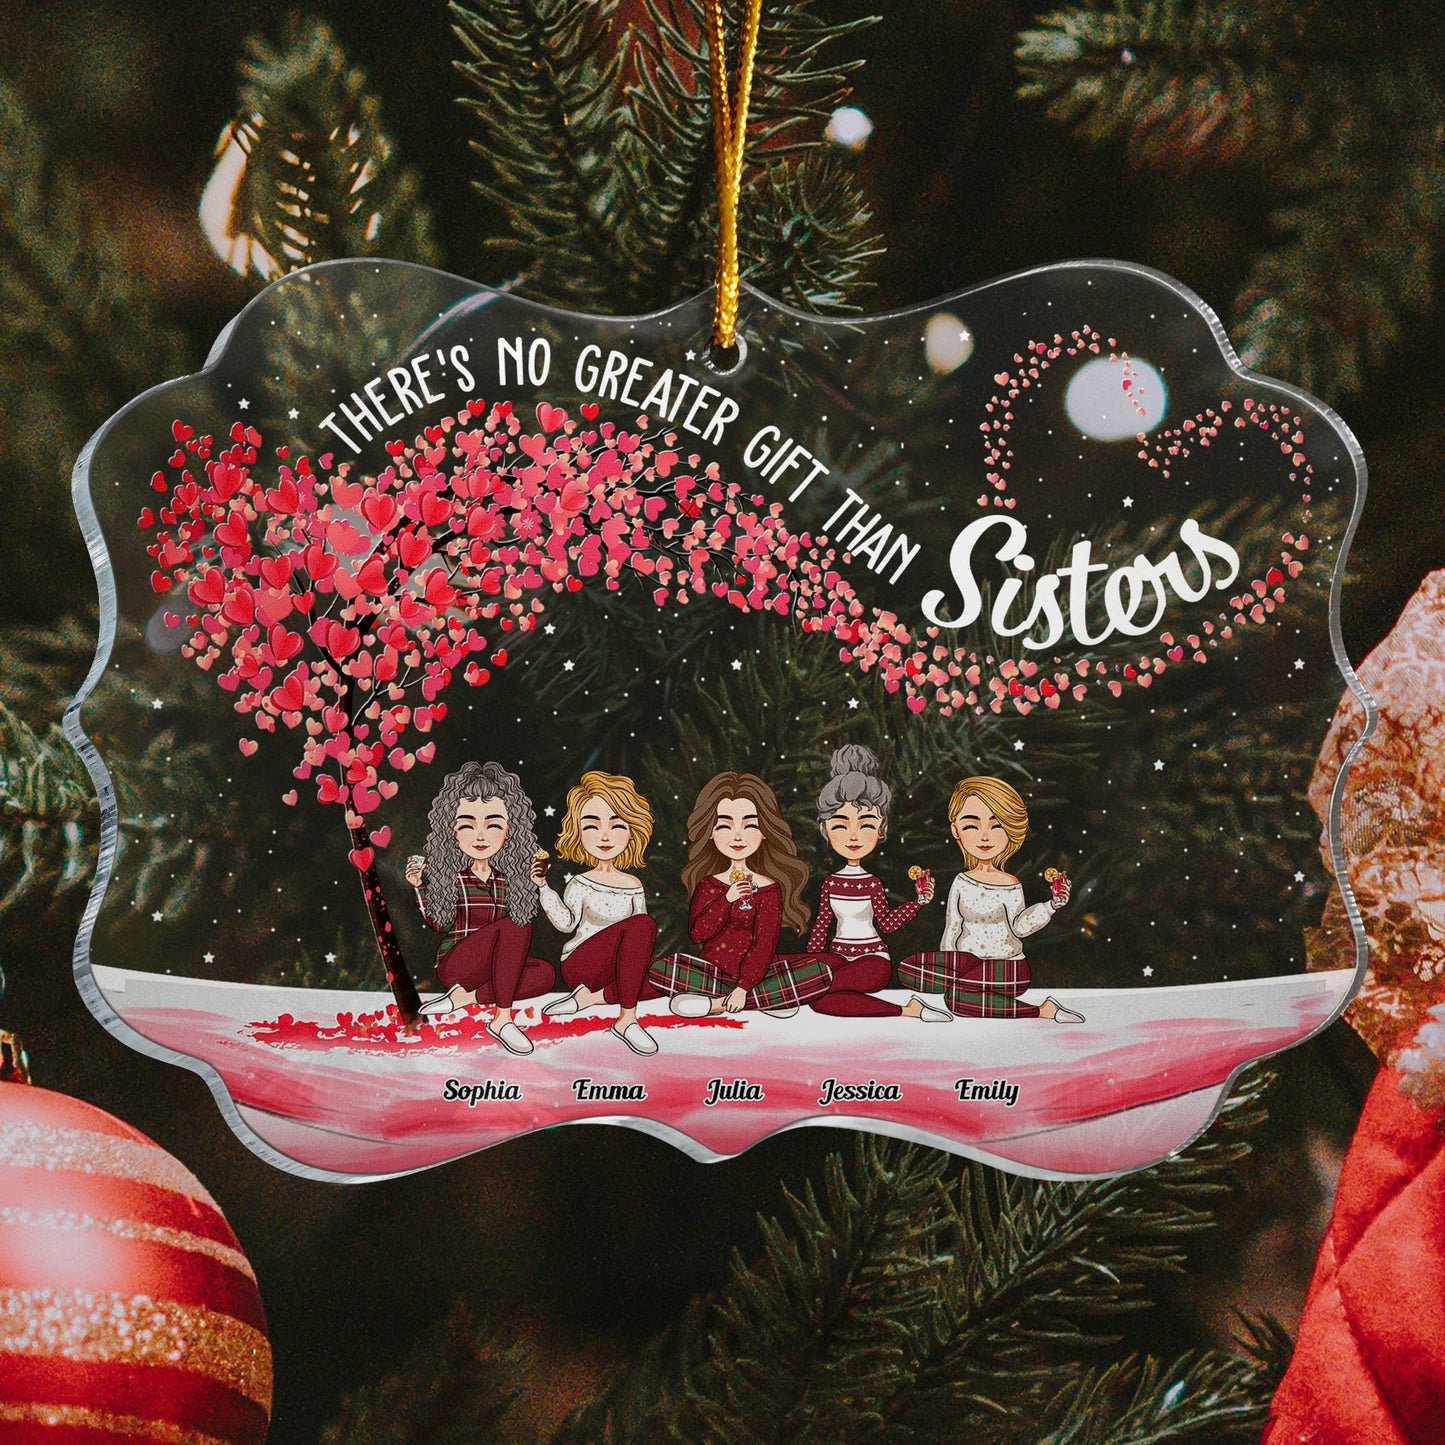 There's No Greater Gift Than Sisters - Personalized Acrylic Ornament